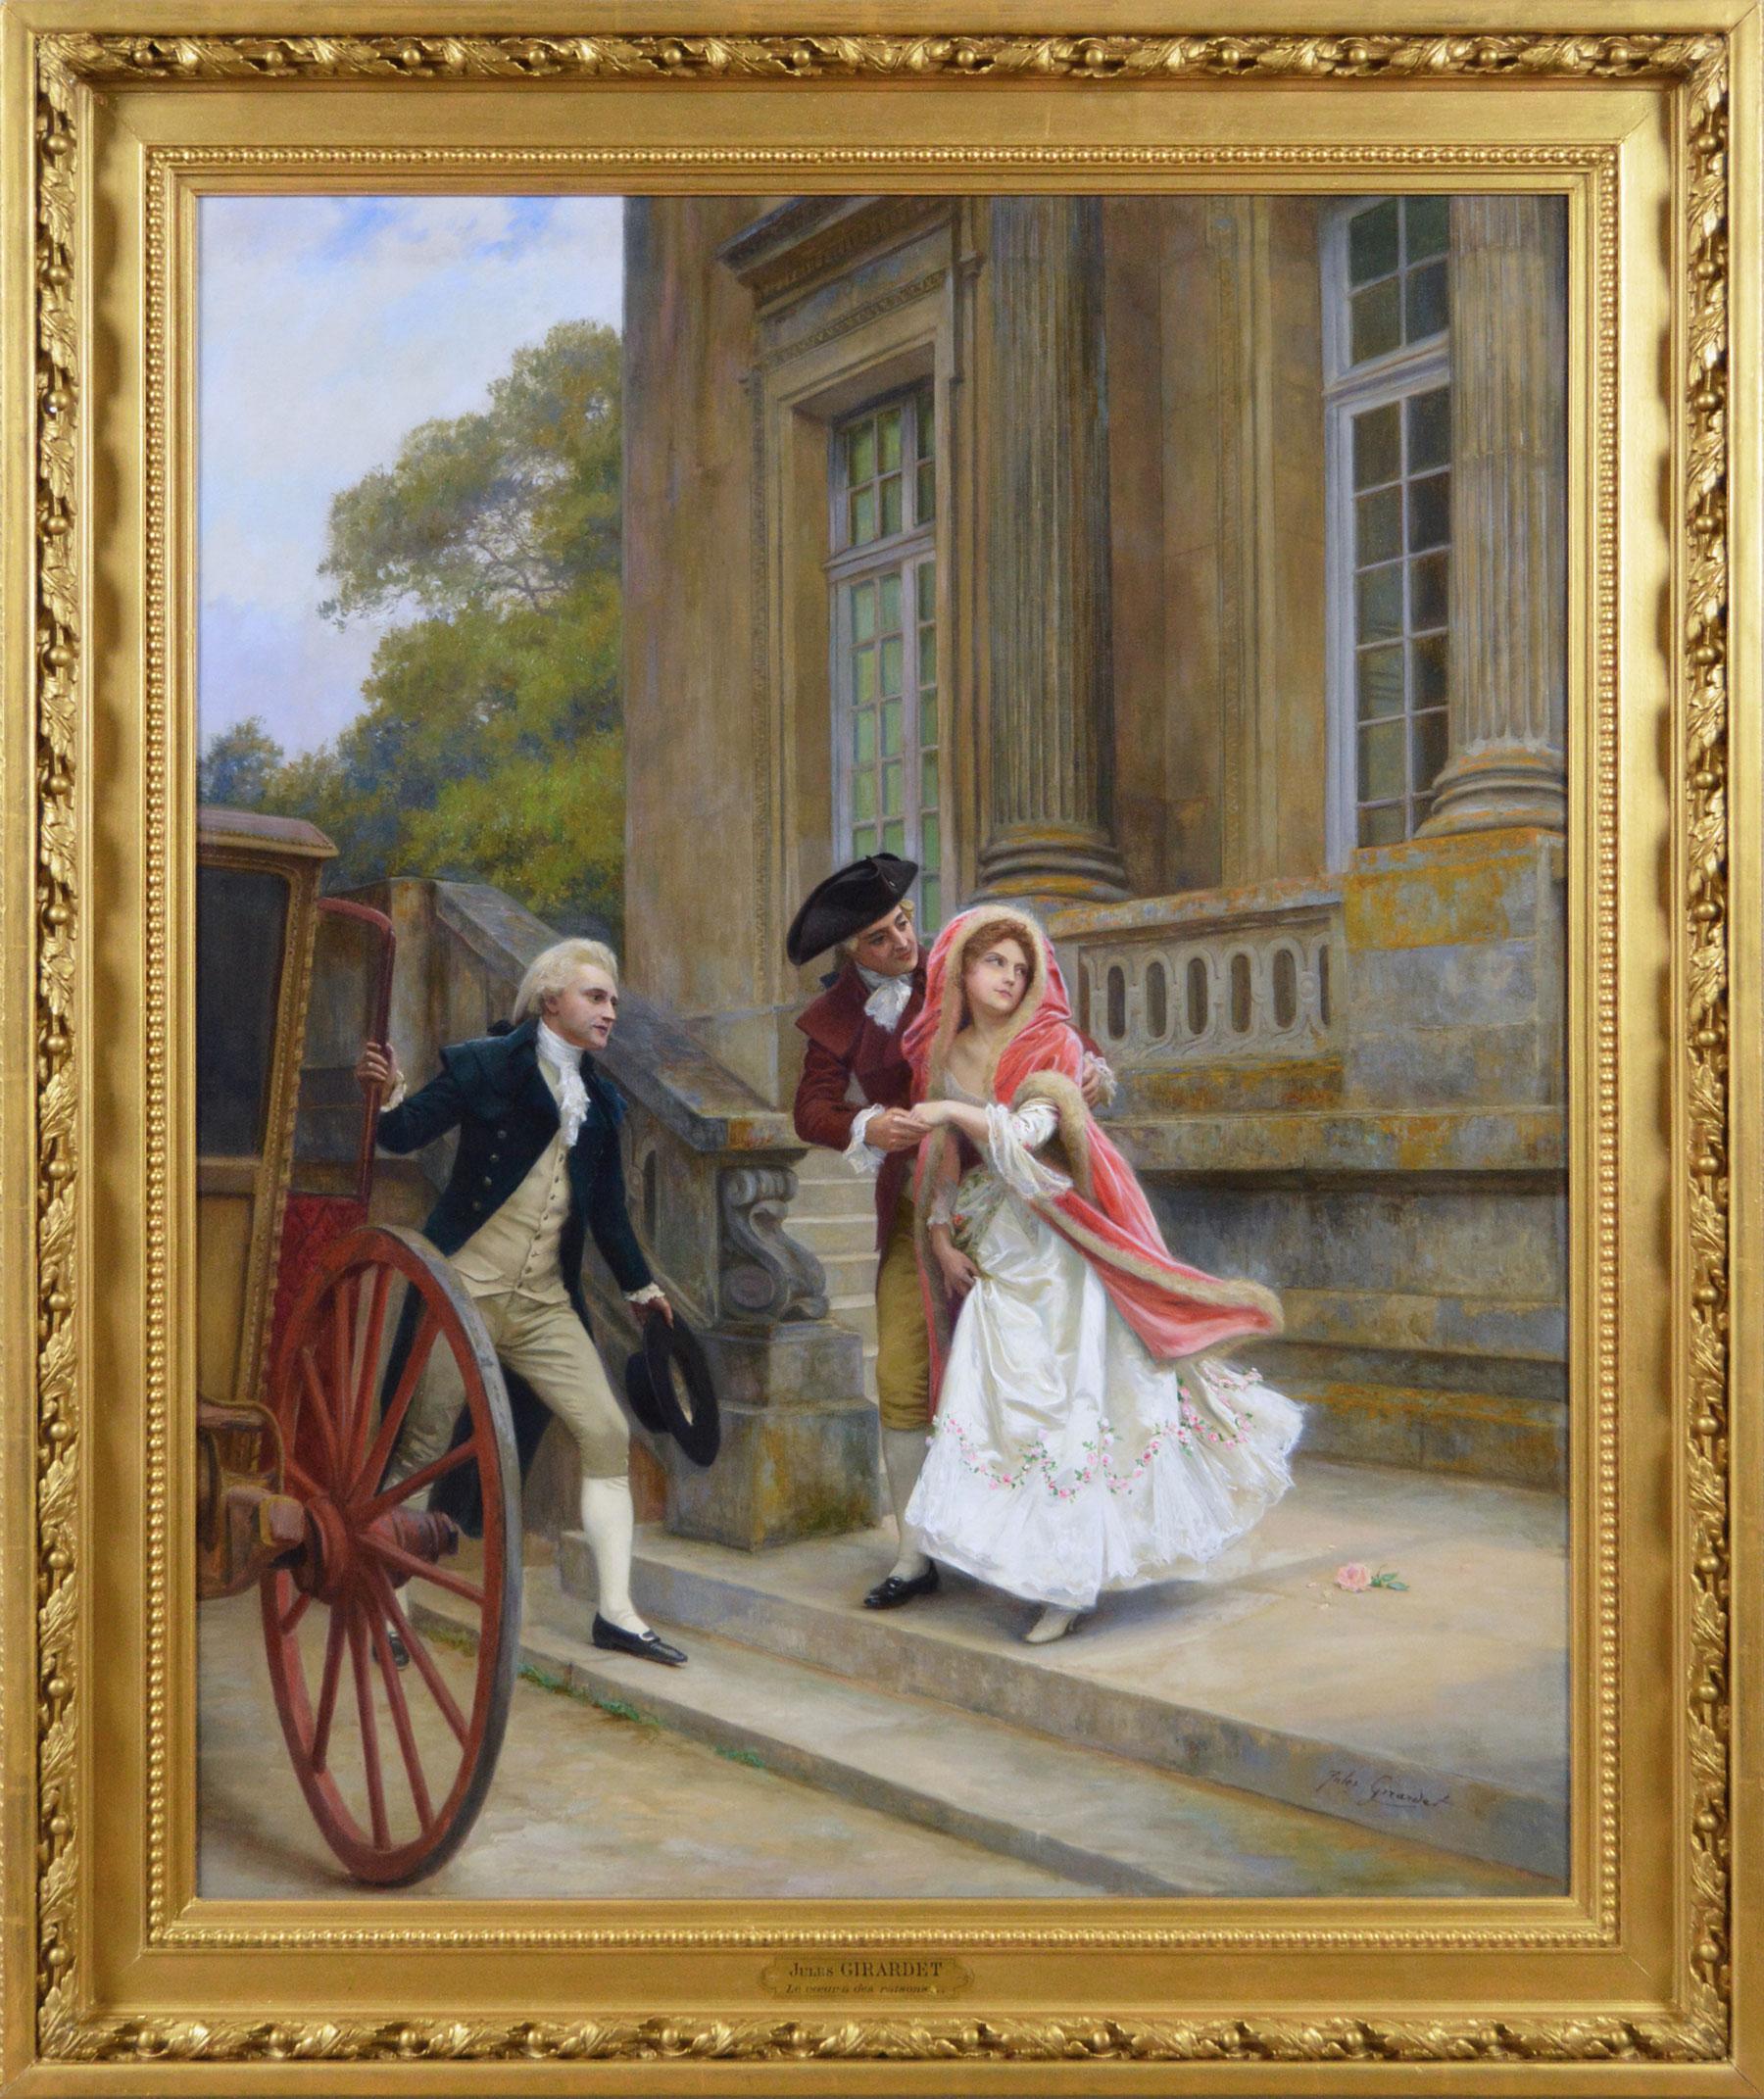 Jules Girardet Figurative Painting - Historical genre oil painting of a couple eloping